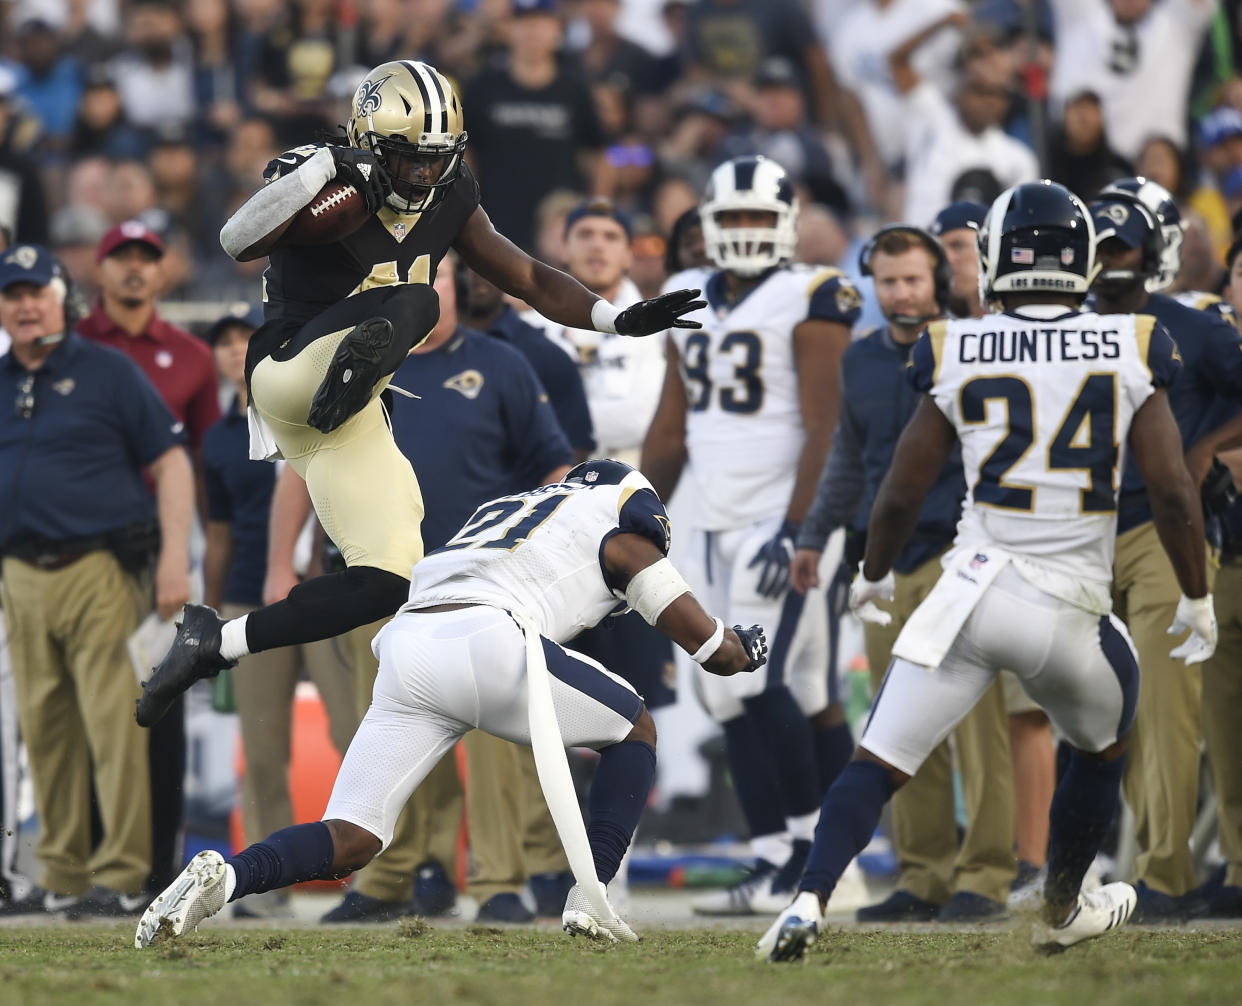 Alvin Kamara with another big game and a look around the rest of the league in Week 12 (AP Photo).